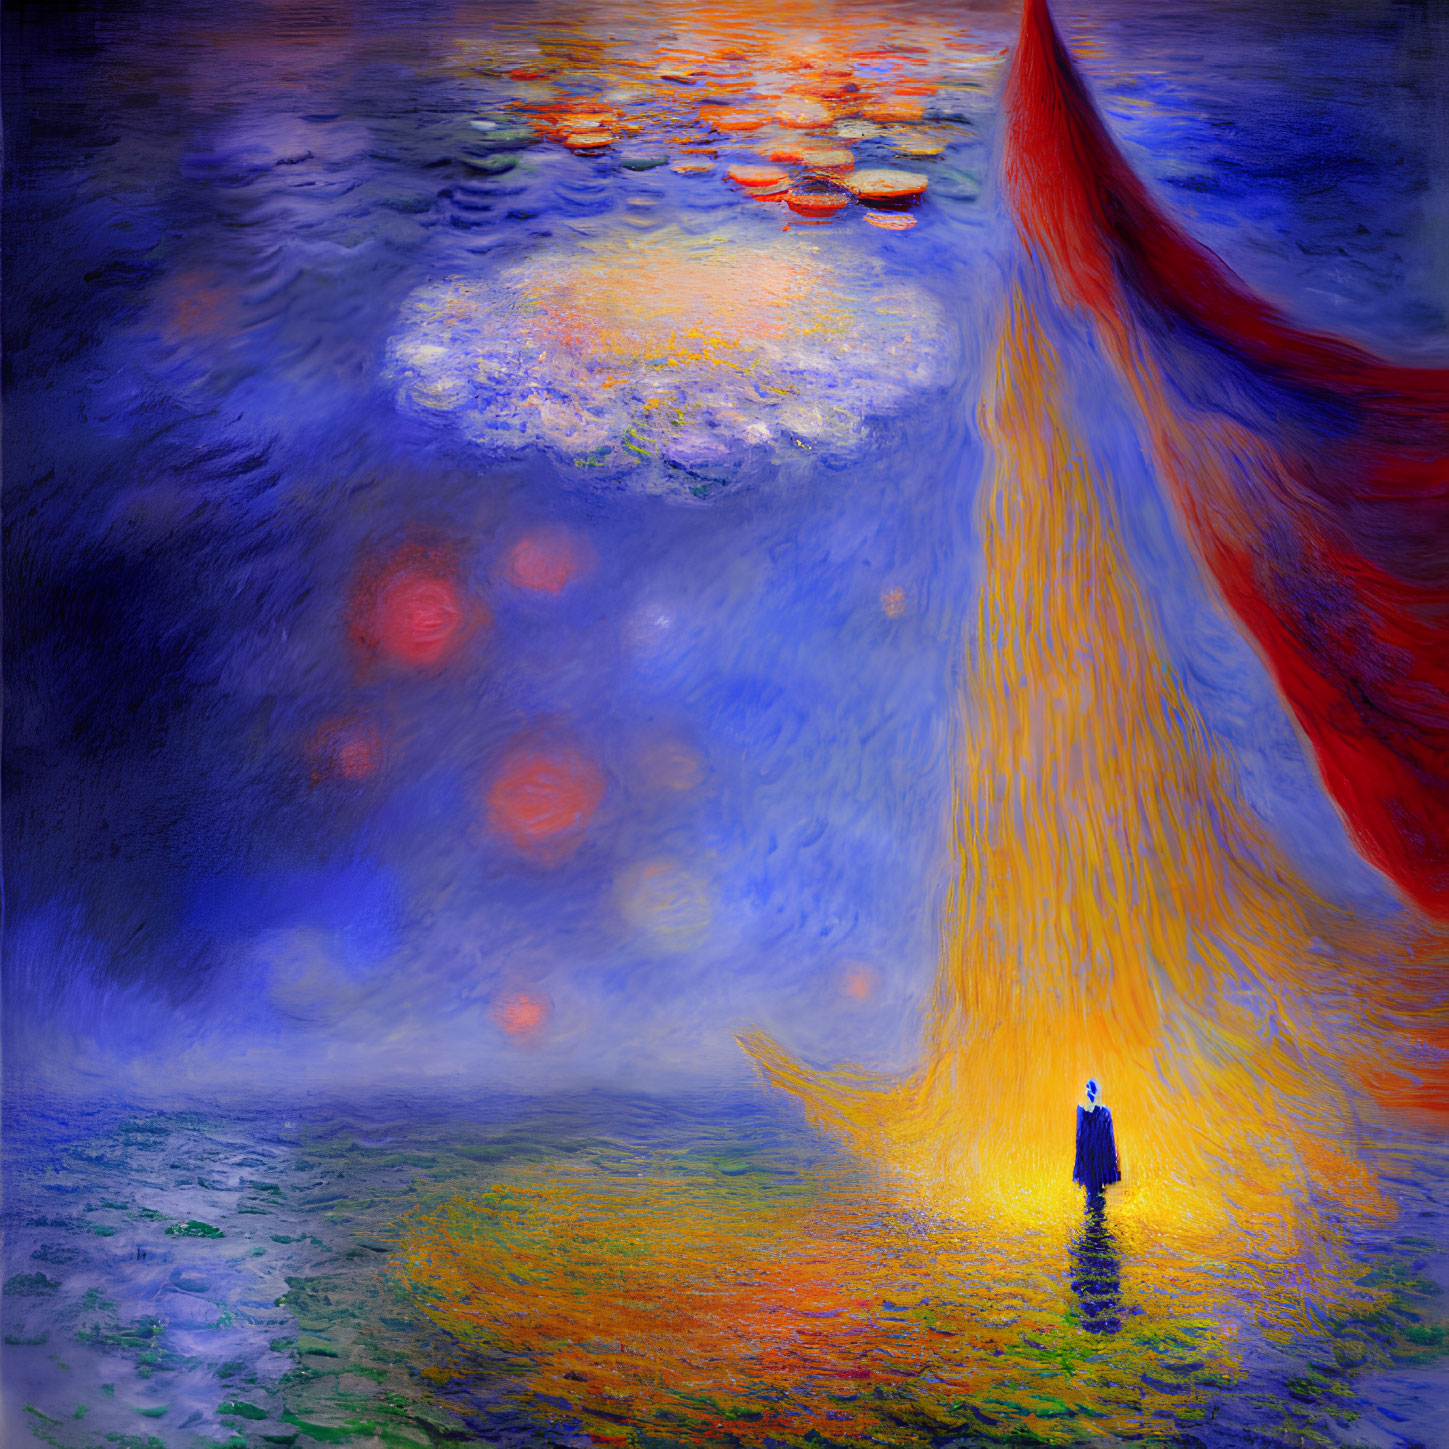 Surreal painting: lone figure, vibrant yellow light, red boat, blue landscape, floating orbs